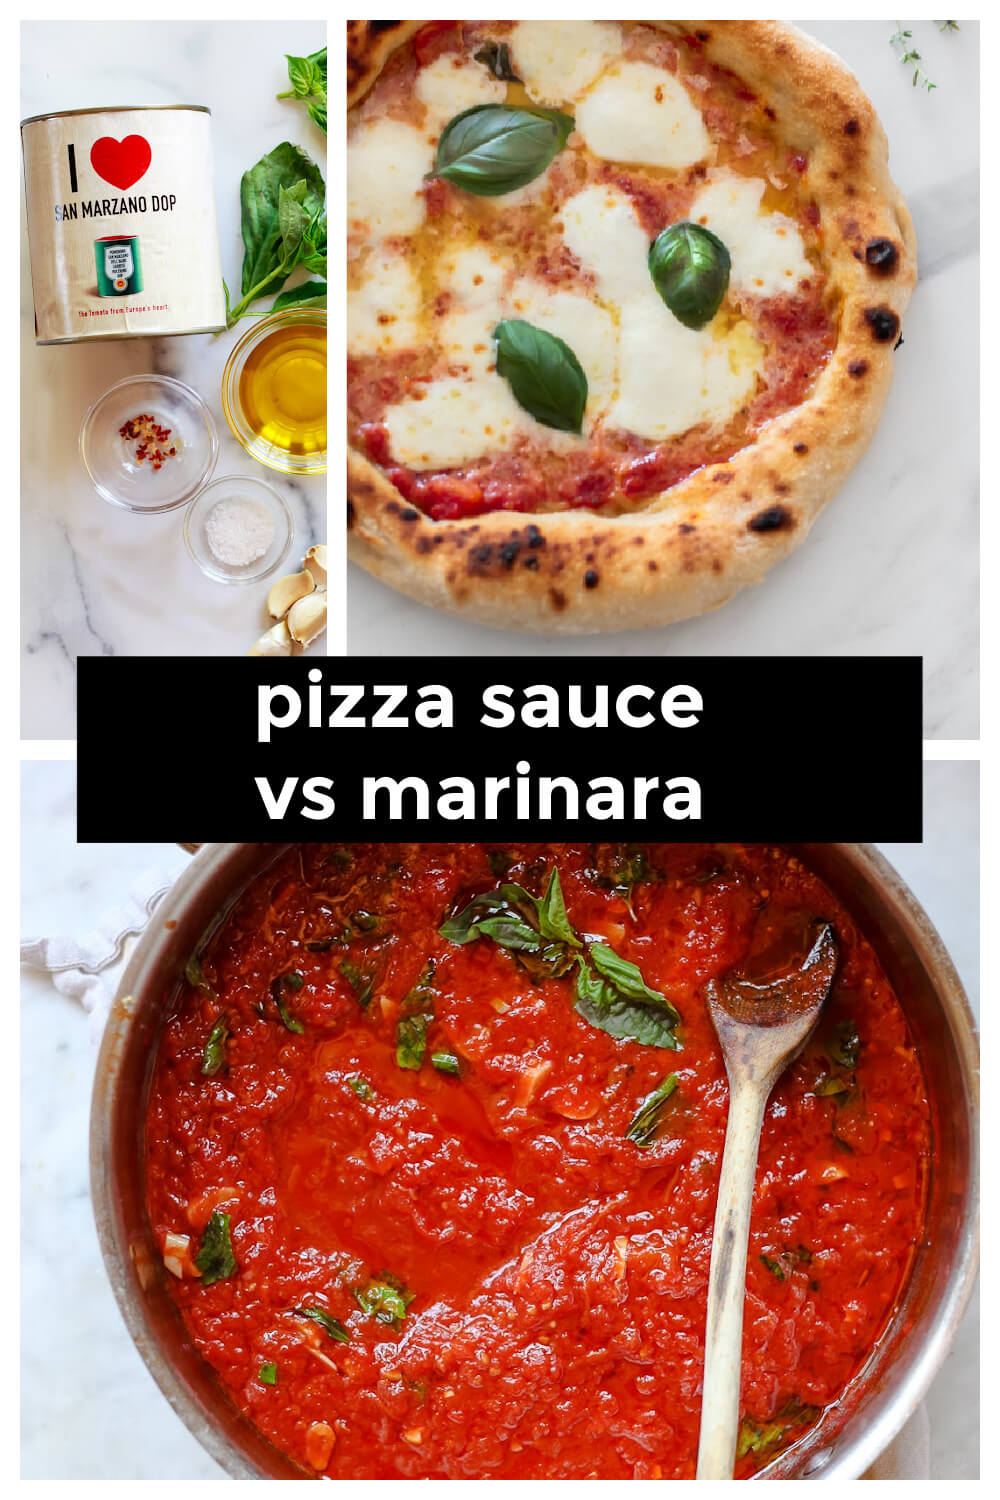 A collage showing a Traditional Neapolitan Pizza with a saucepan of marinara next to a photo of traditional pizza sauce and marinara ingredients. Text overlay reads "pizza sauce vs marinara" 